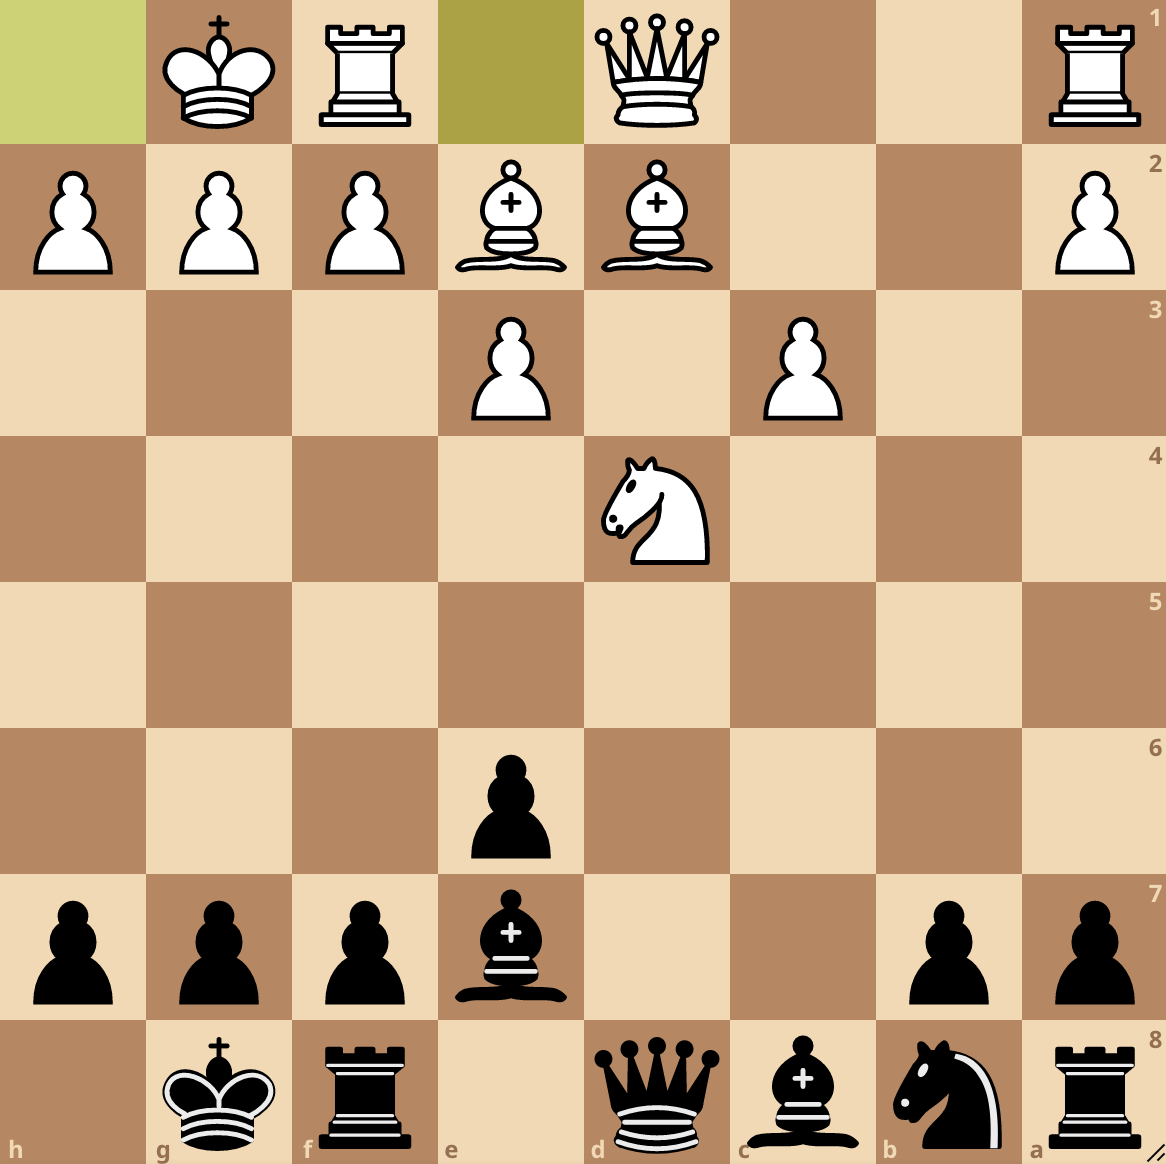 I played over 20 moves and finally lichess told me I didn't move